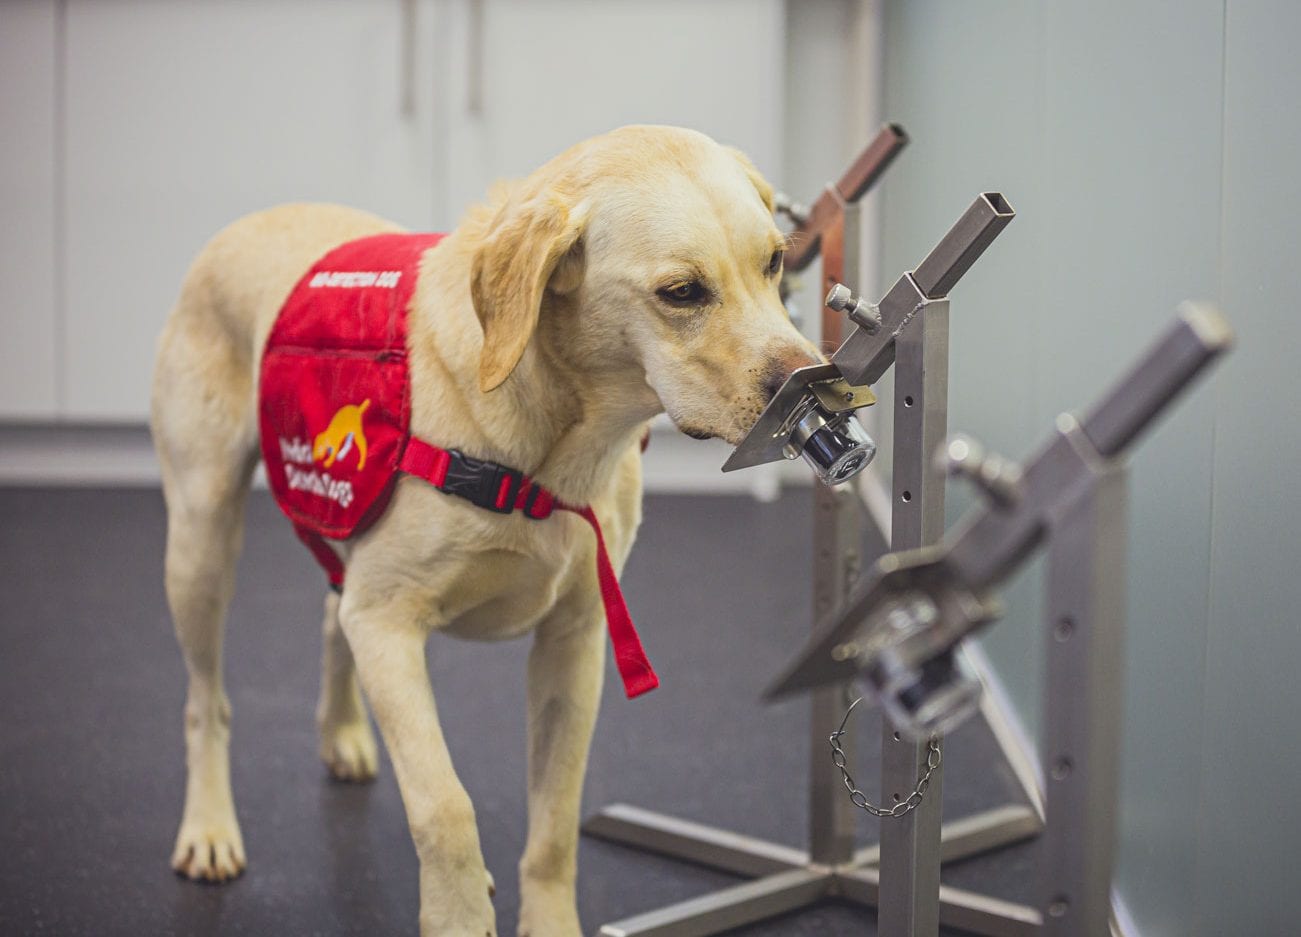 New study finds that trained dogs can detect COVID-19 in under one second with up to 94% accuracy, The Manc